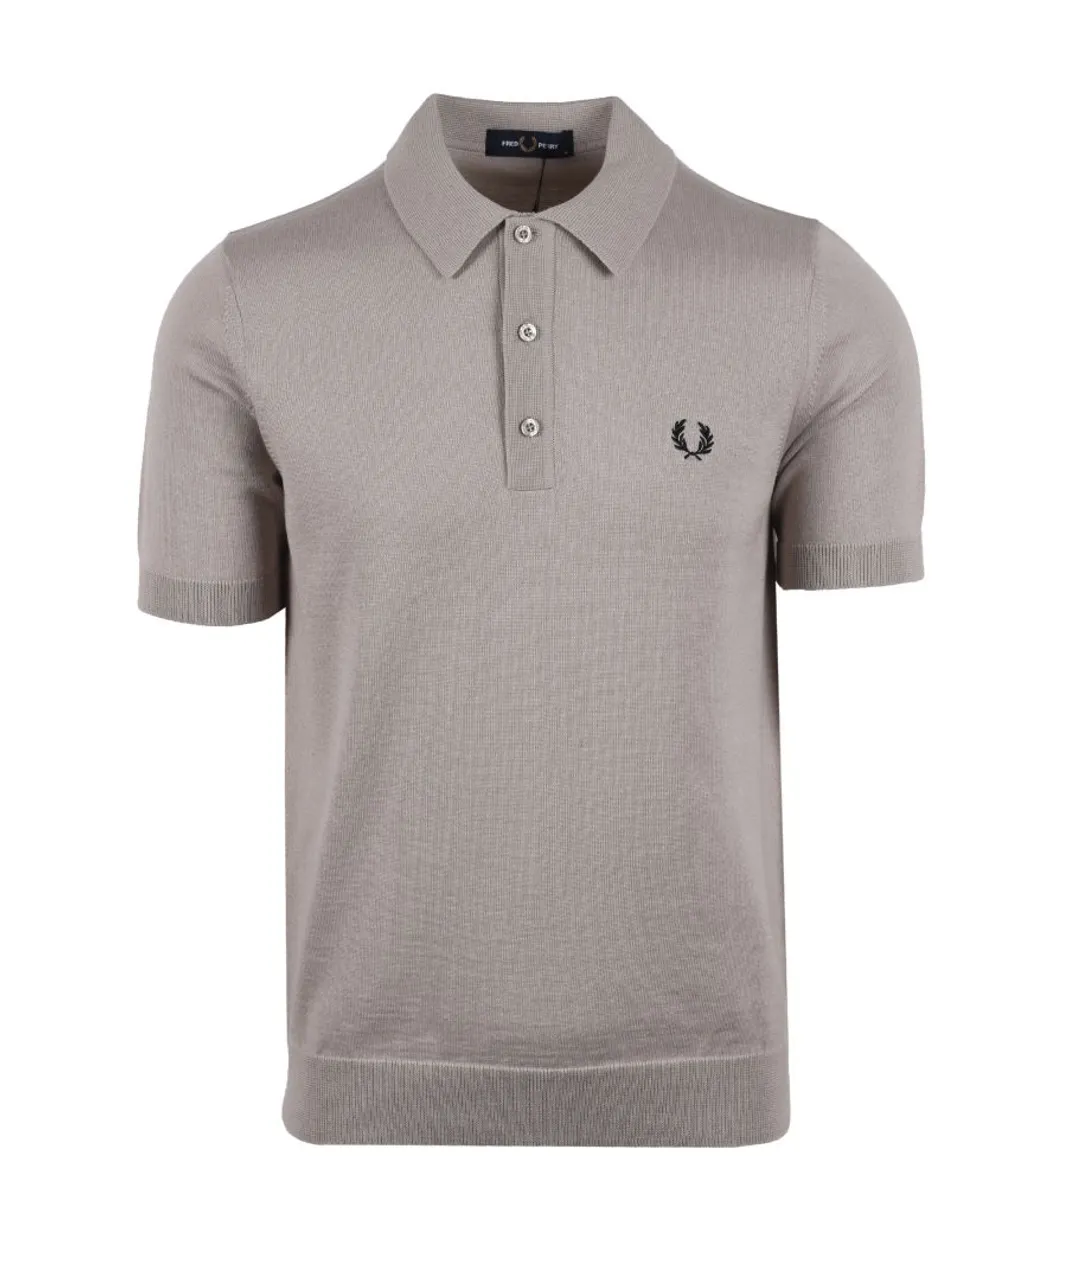 Fred Perry Mens Classic Kitted Polo Shirt Dark Oatmeal - Beige